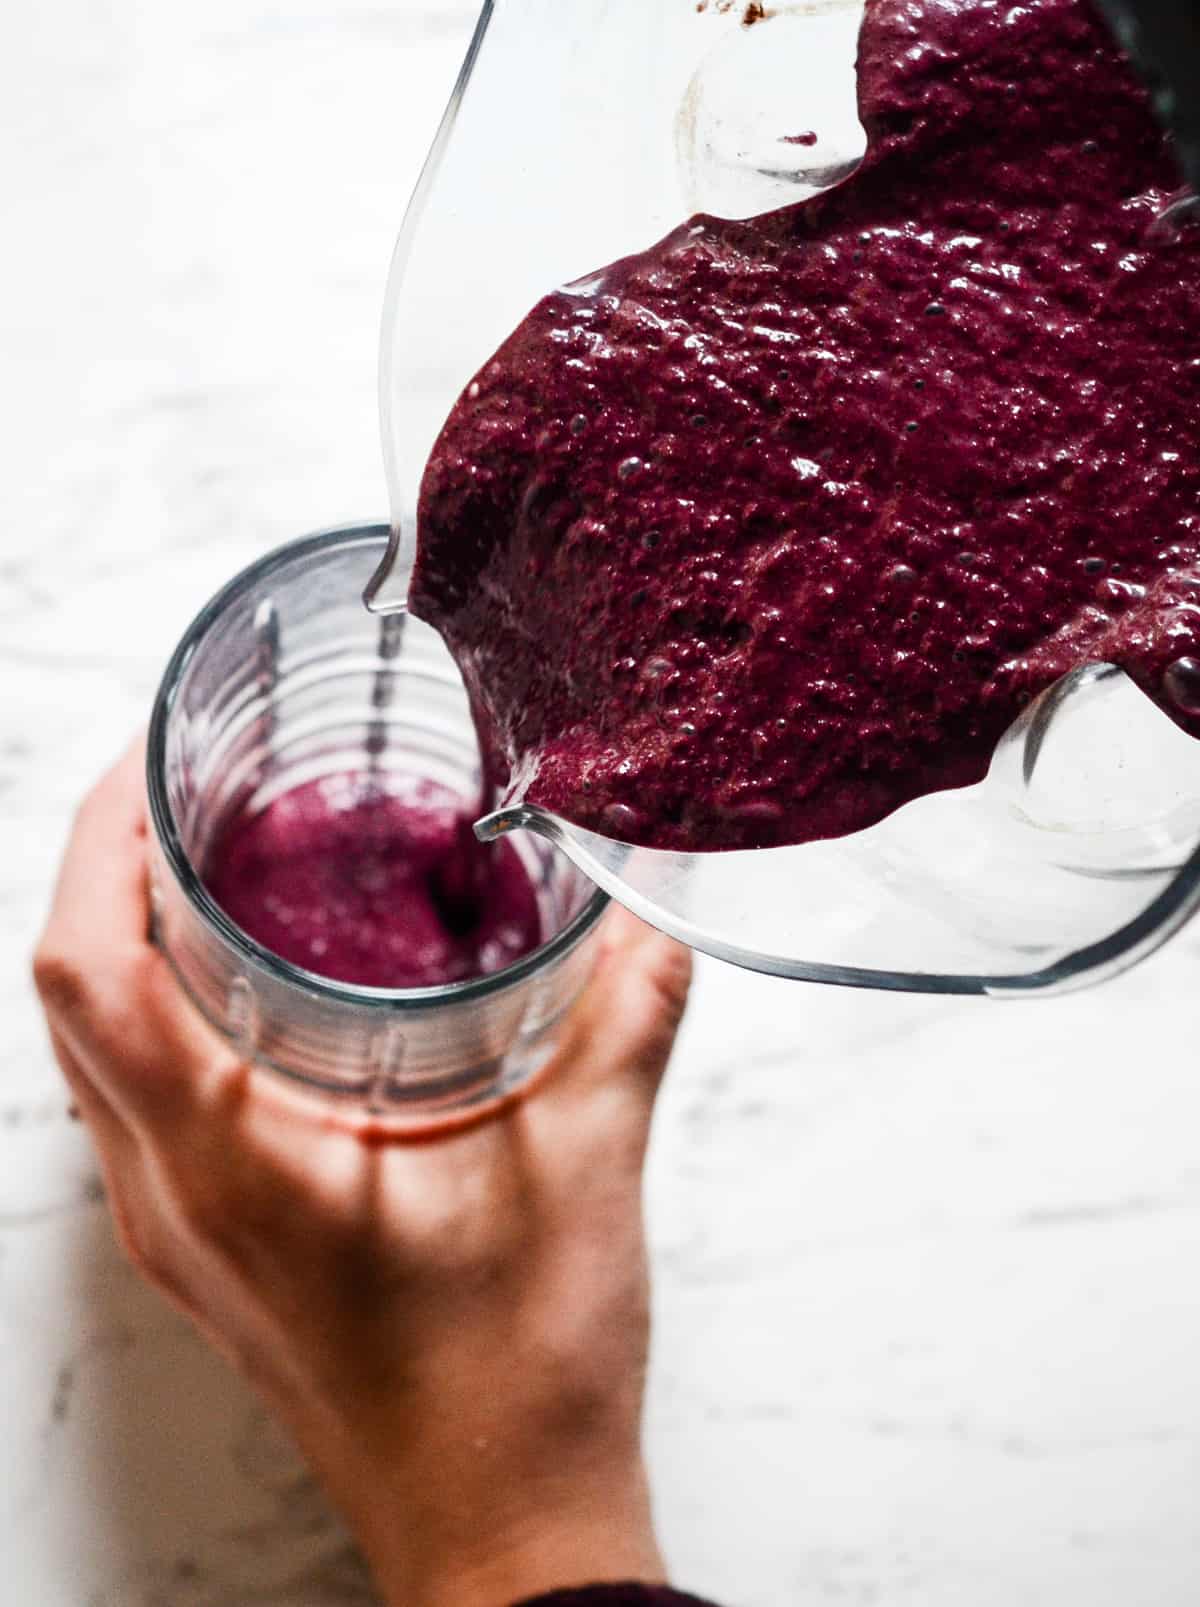 Blueberry smoothie being poured into a glass cup.